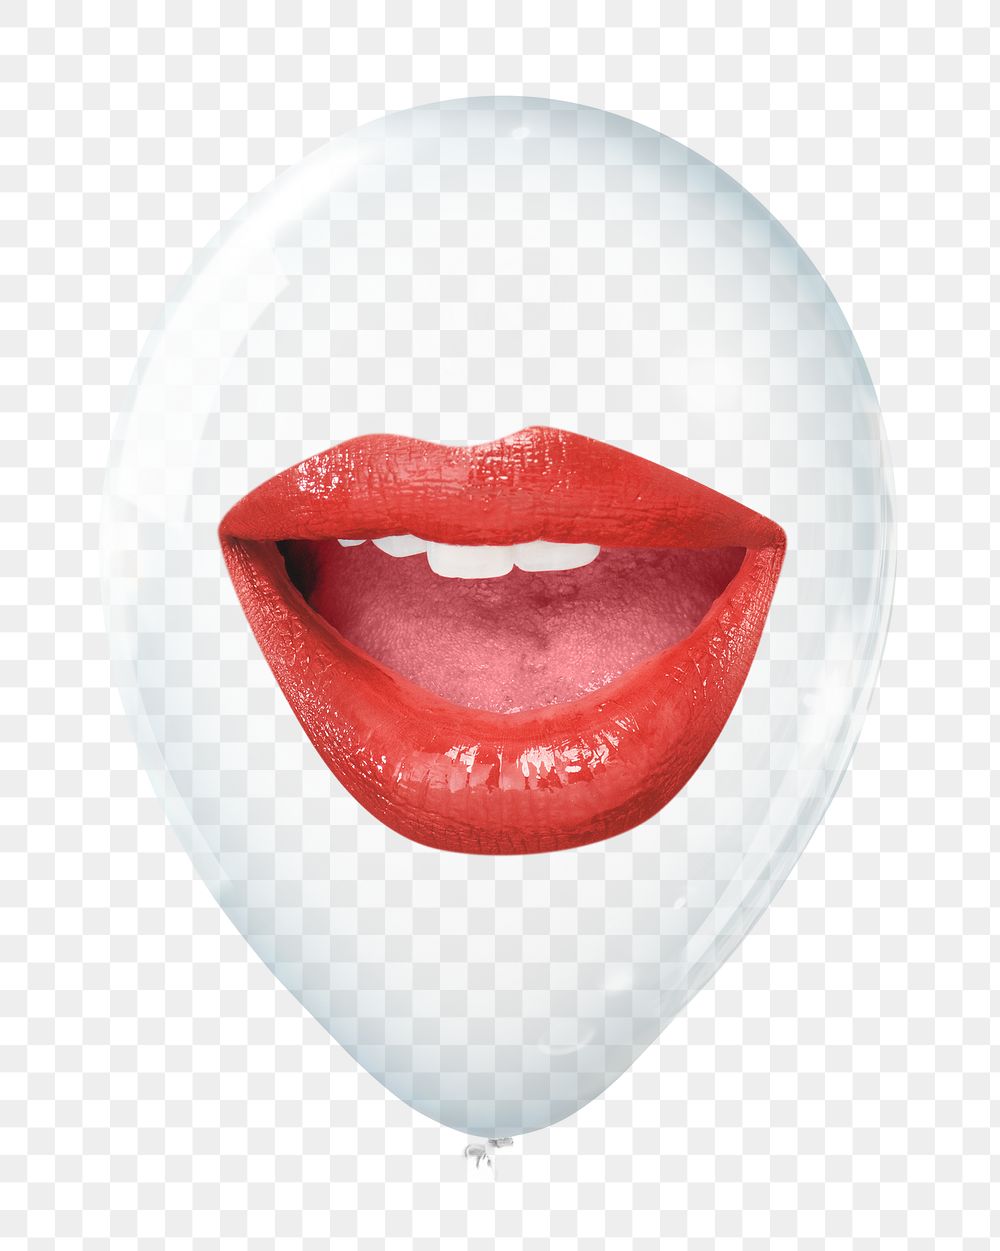 Red lips png in clear balloon, transparent background